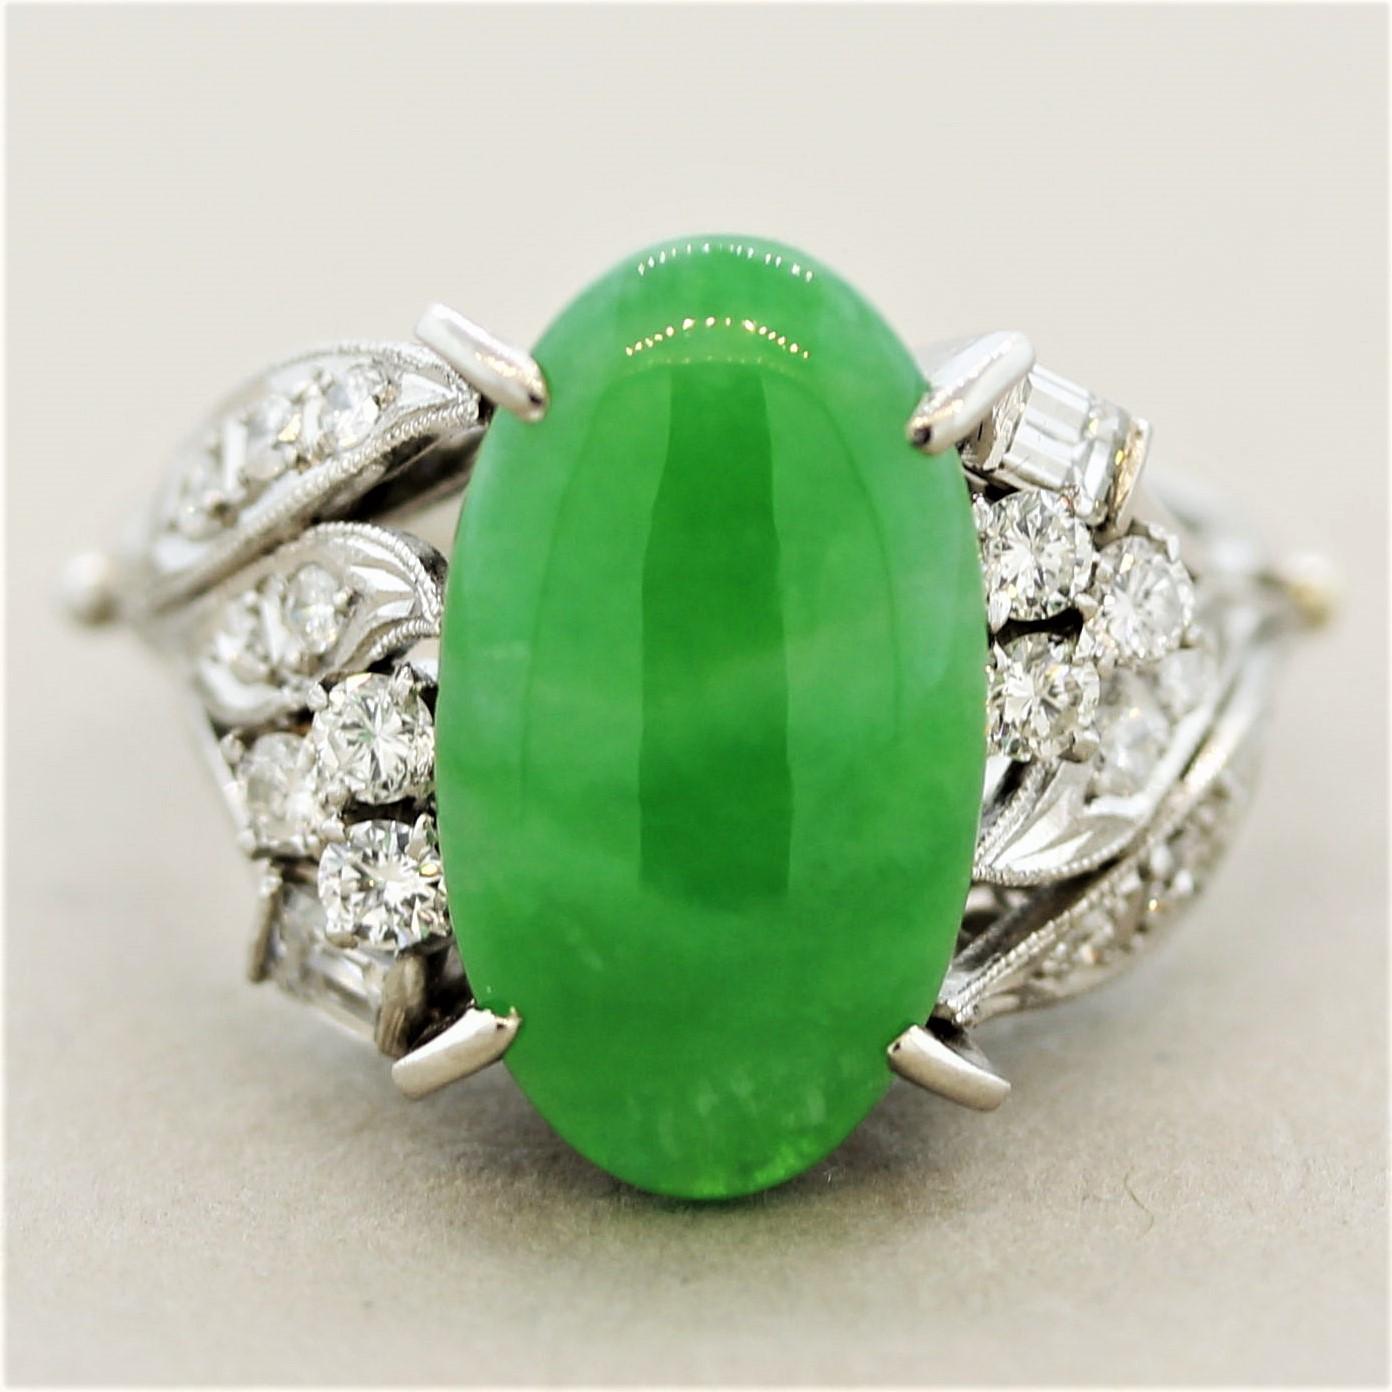 A mid-century treasure from the 1950’s-1960’s! It features a beautiful bright green jade that is natural and free of any treatment, “Type A.” It is accented by 0.61 carats of round brilliant-cut and fancy shape diamonds set in a floral filigree